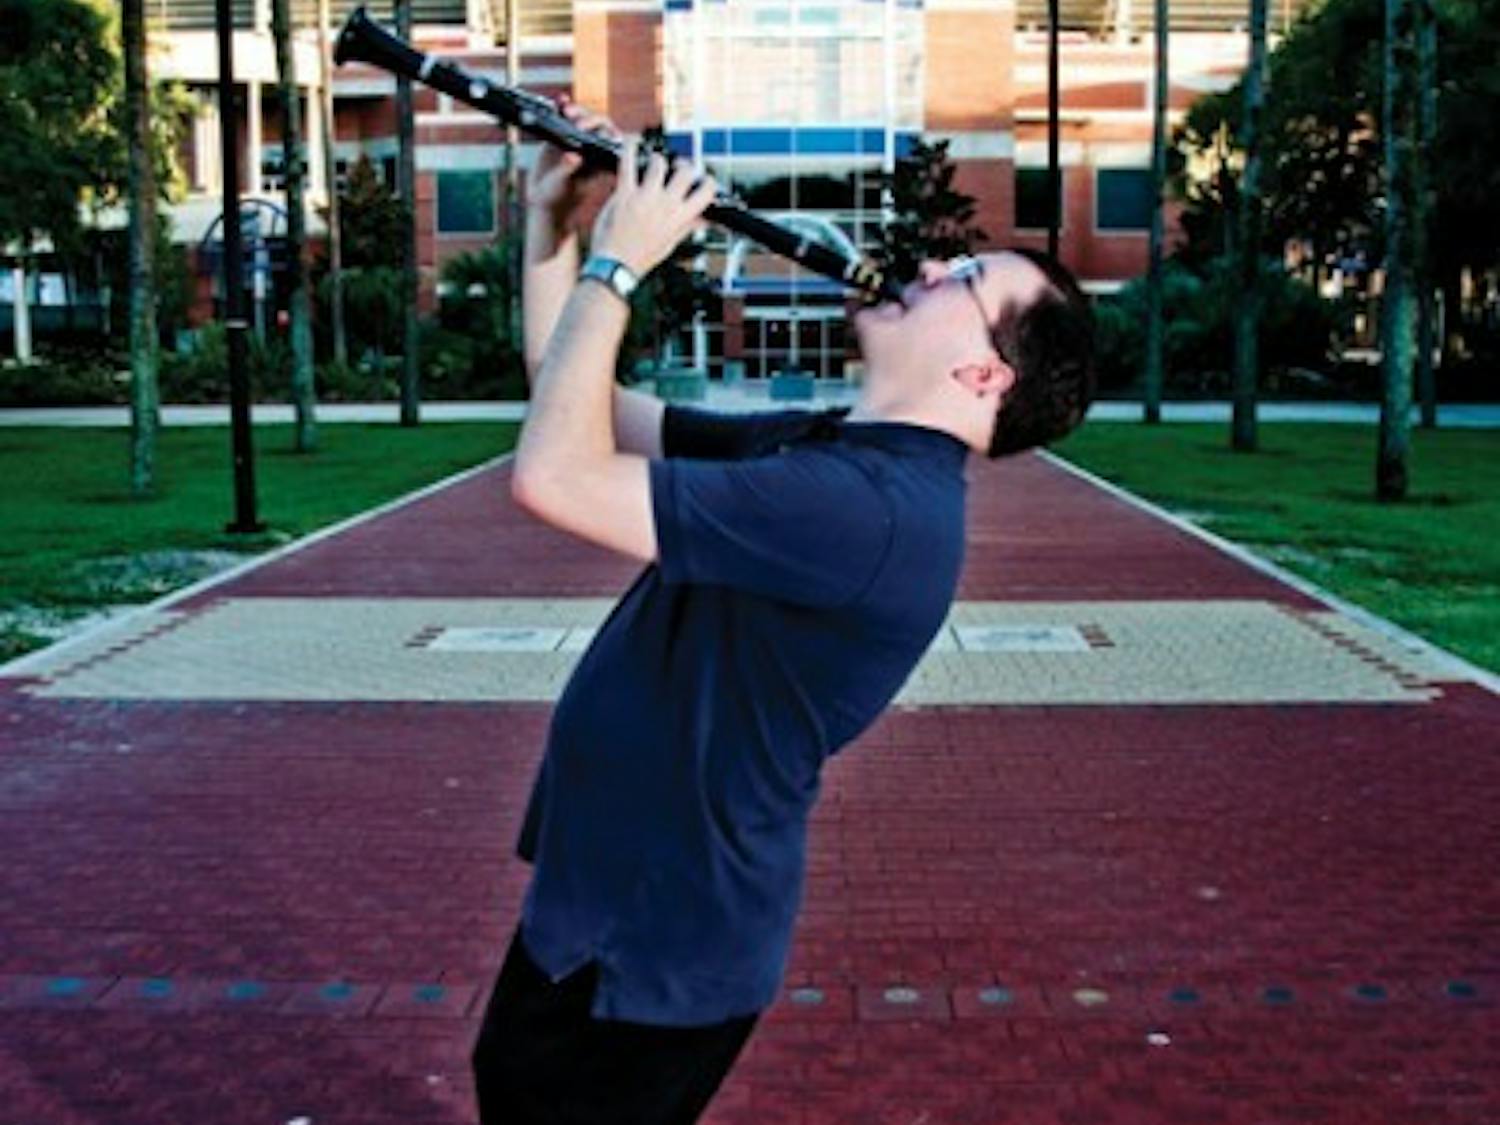 Dale Fedele, who studies political science and music performance, poses with his clarinet outside the Ben Hill Griffin Stadium. The International Clarinet Association hosted an Young Artists Competition, where Fedele placed fourth.